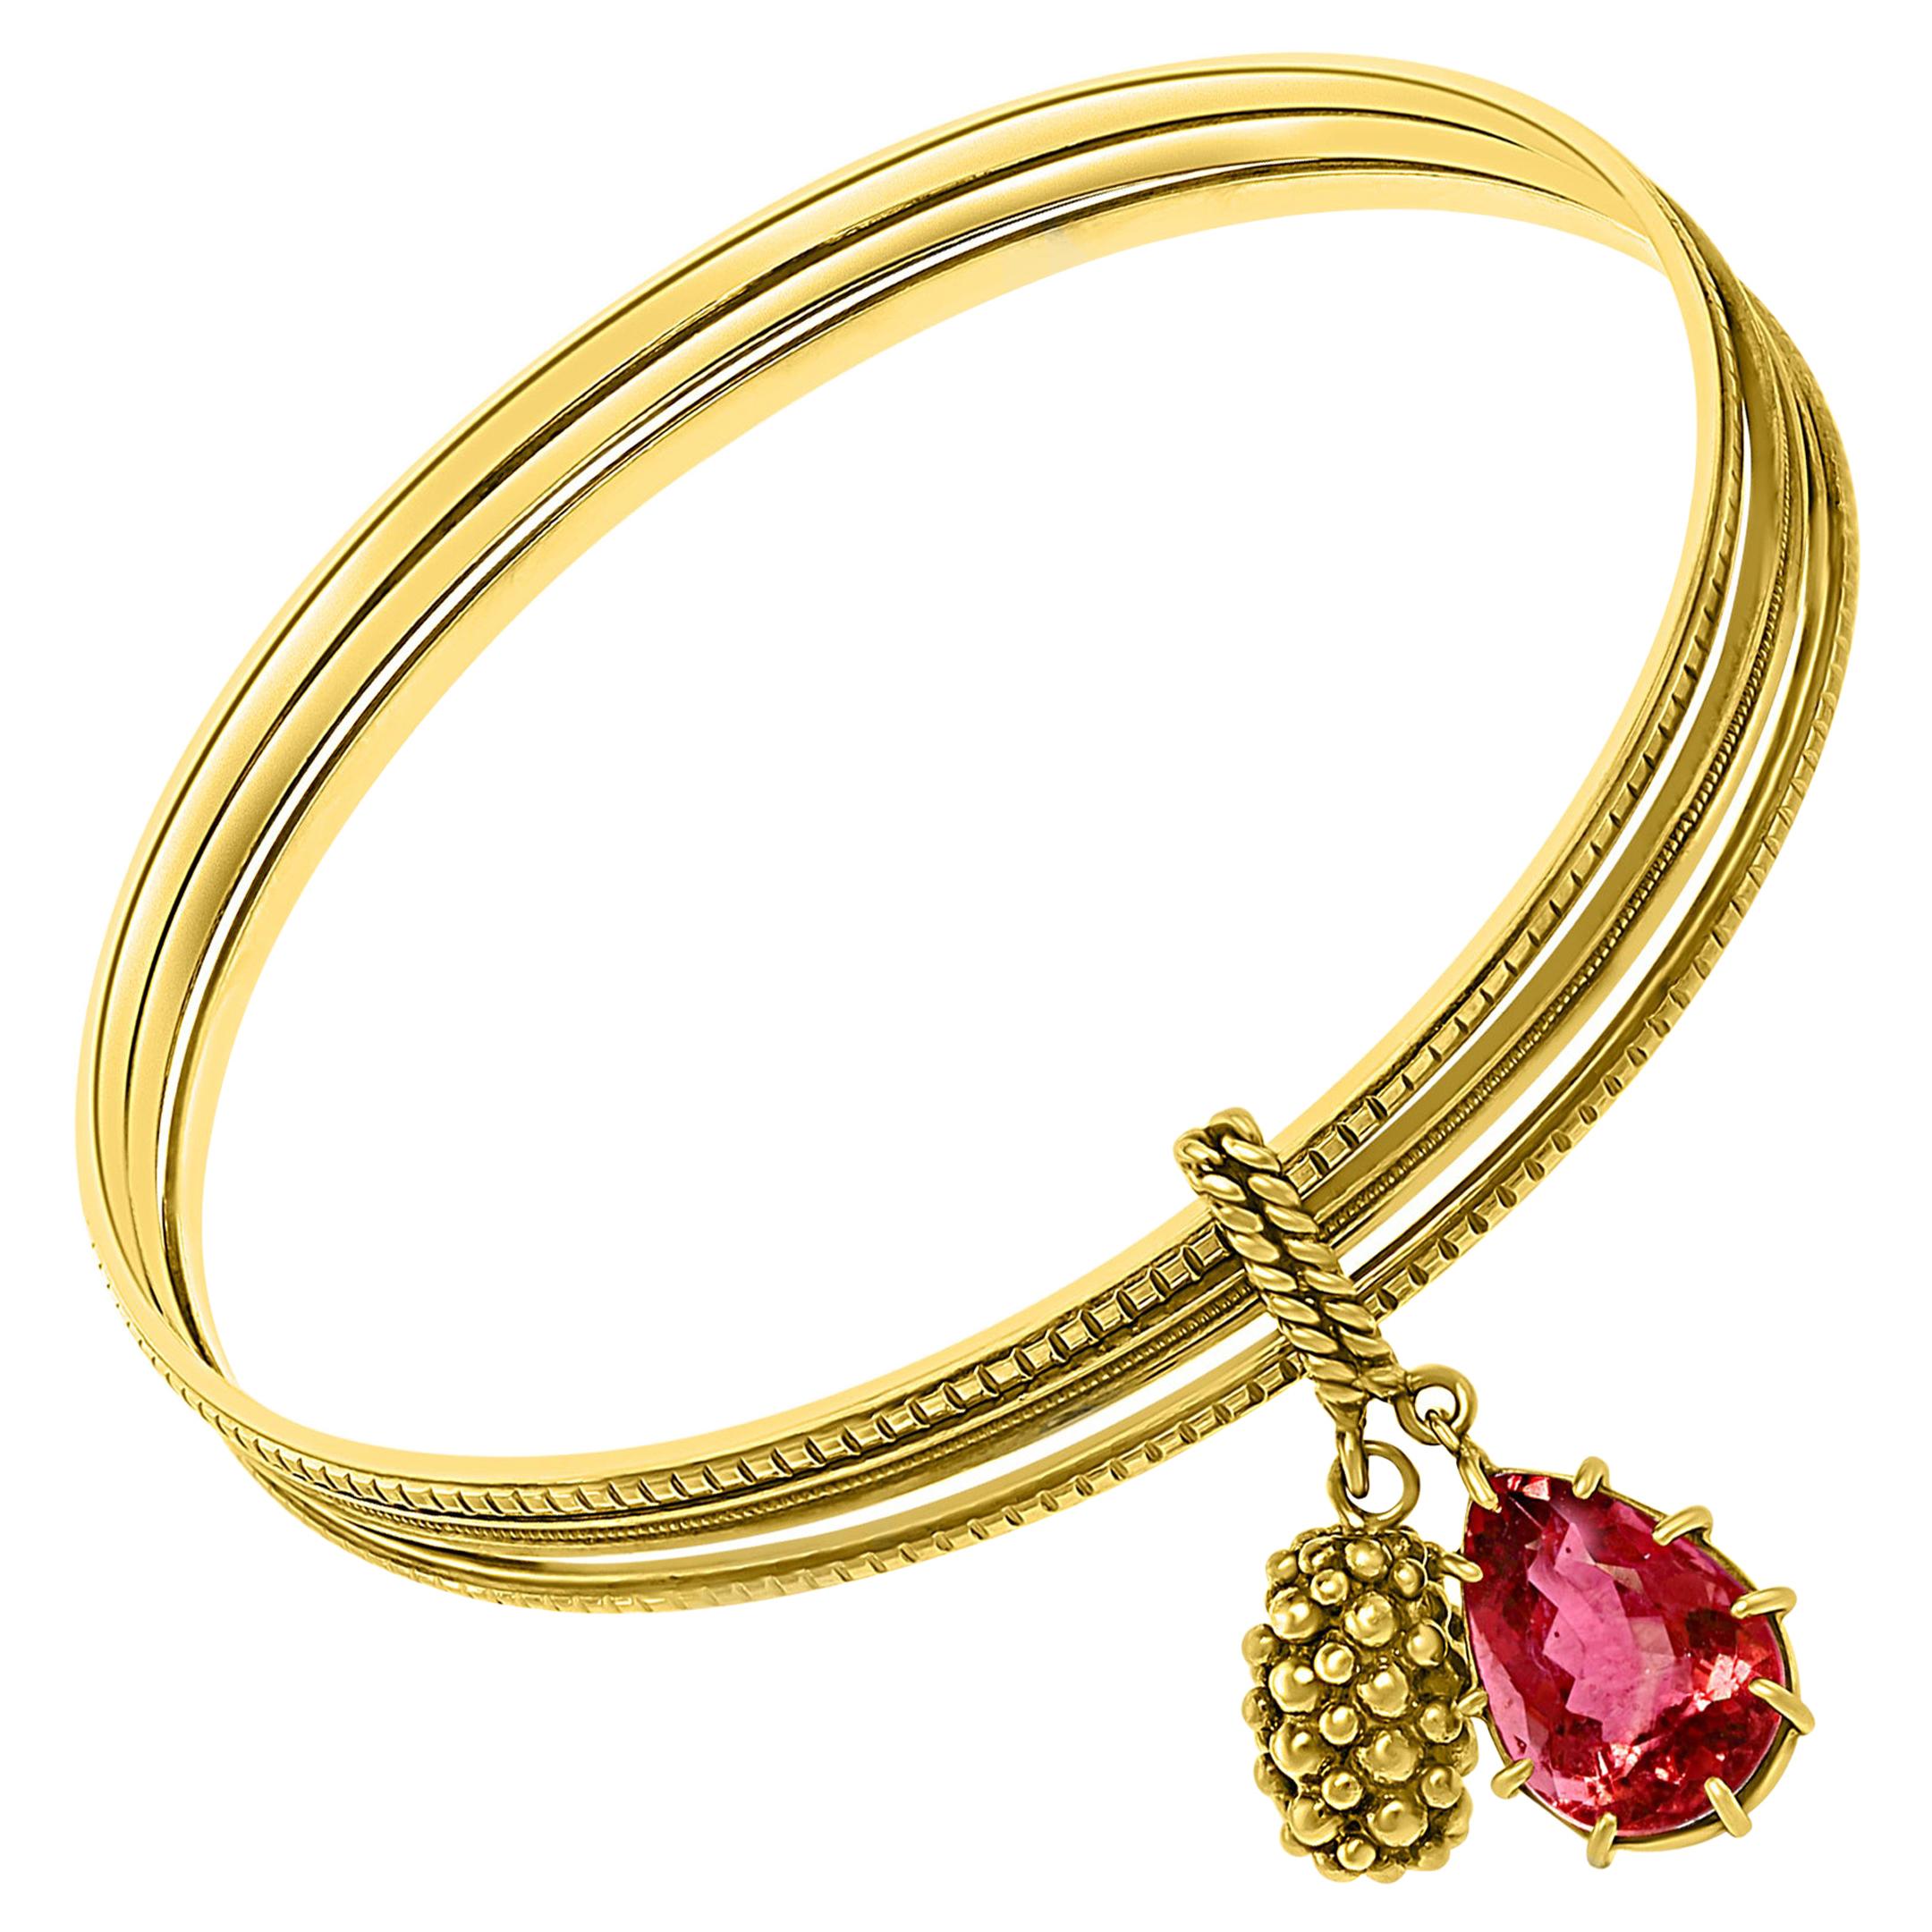 Magnificent Three Yellow Gold Bangle Attached by Pink Tourmaline and Gold Charm